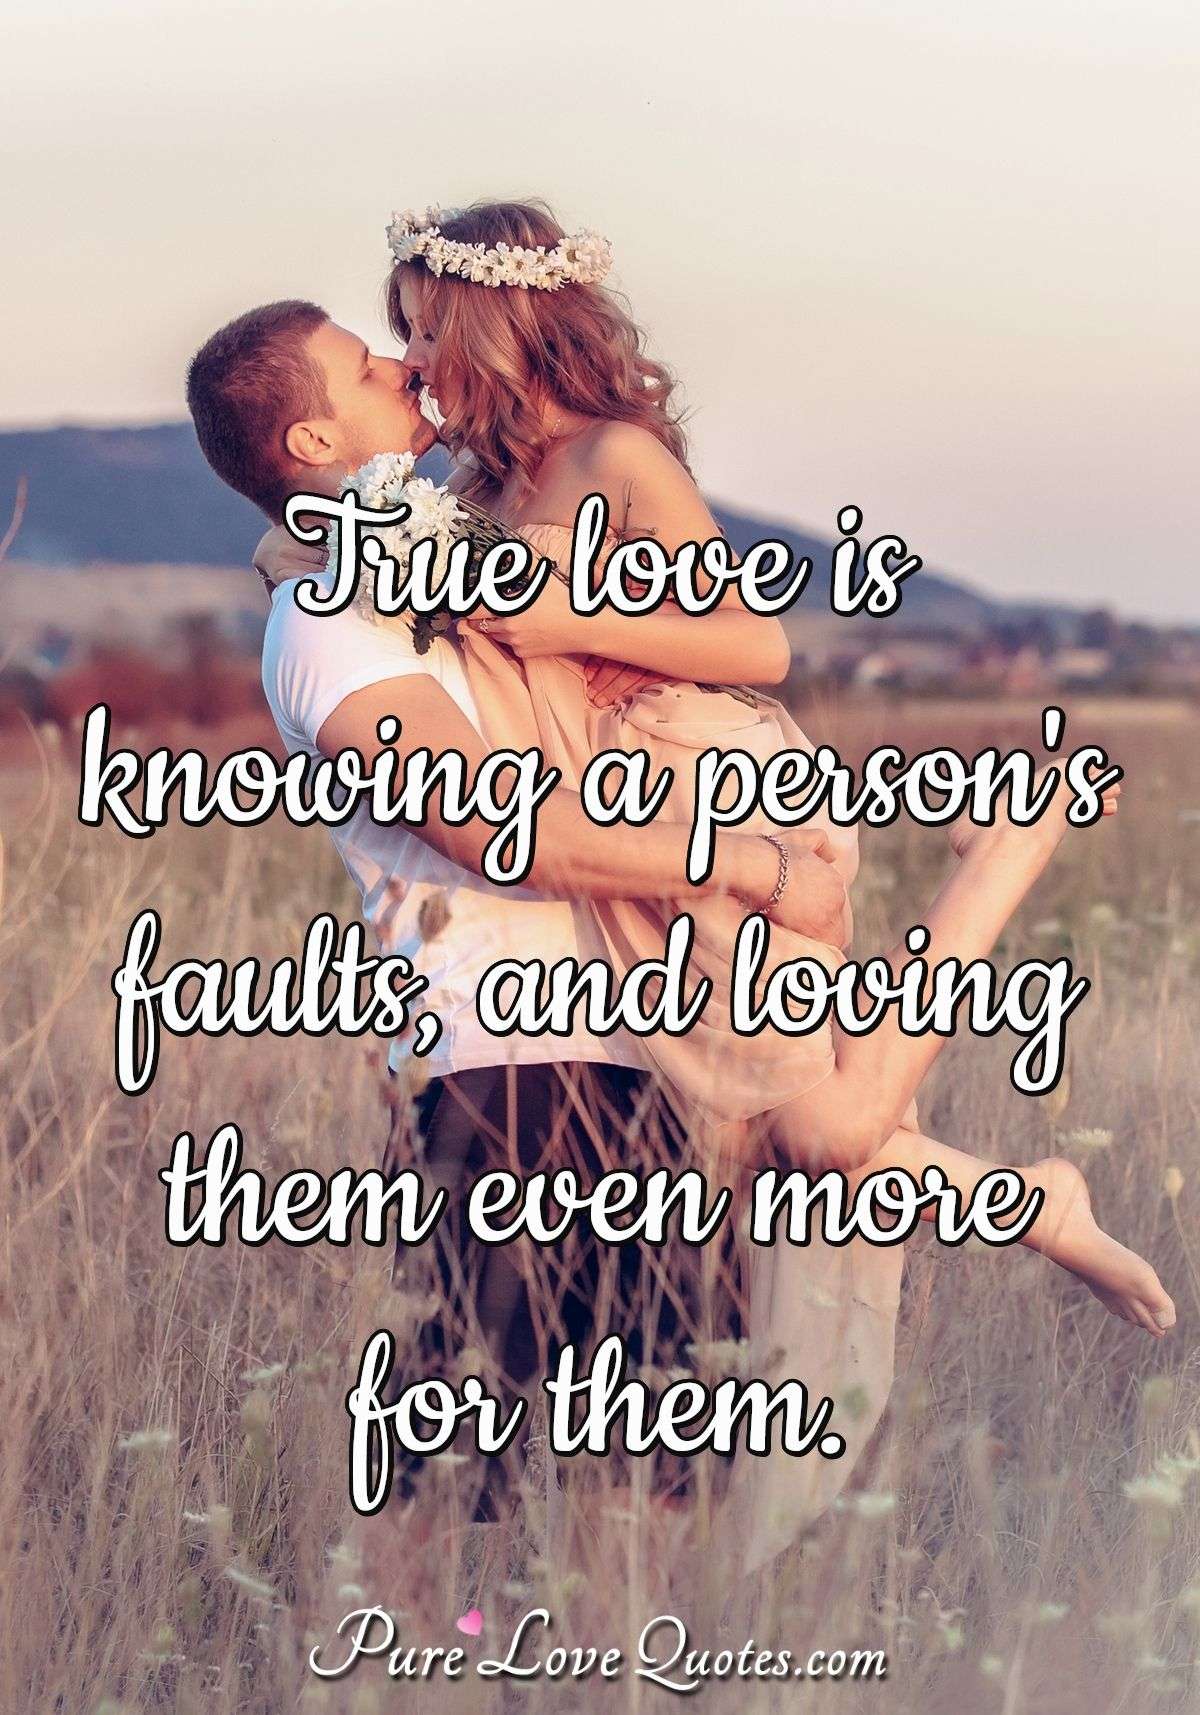 True love is knowing a person's faults, and loving them even more for them. - Anonymous